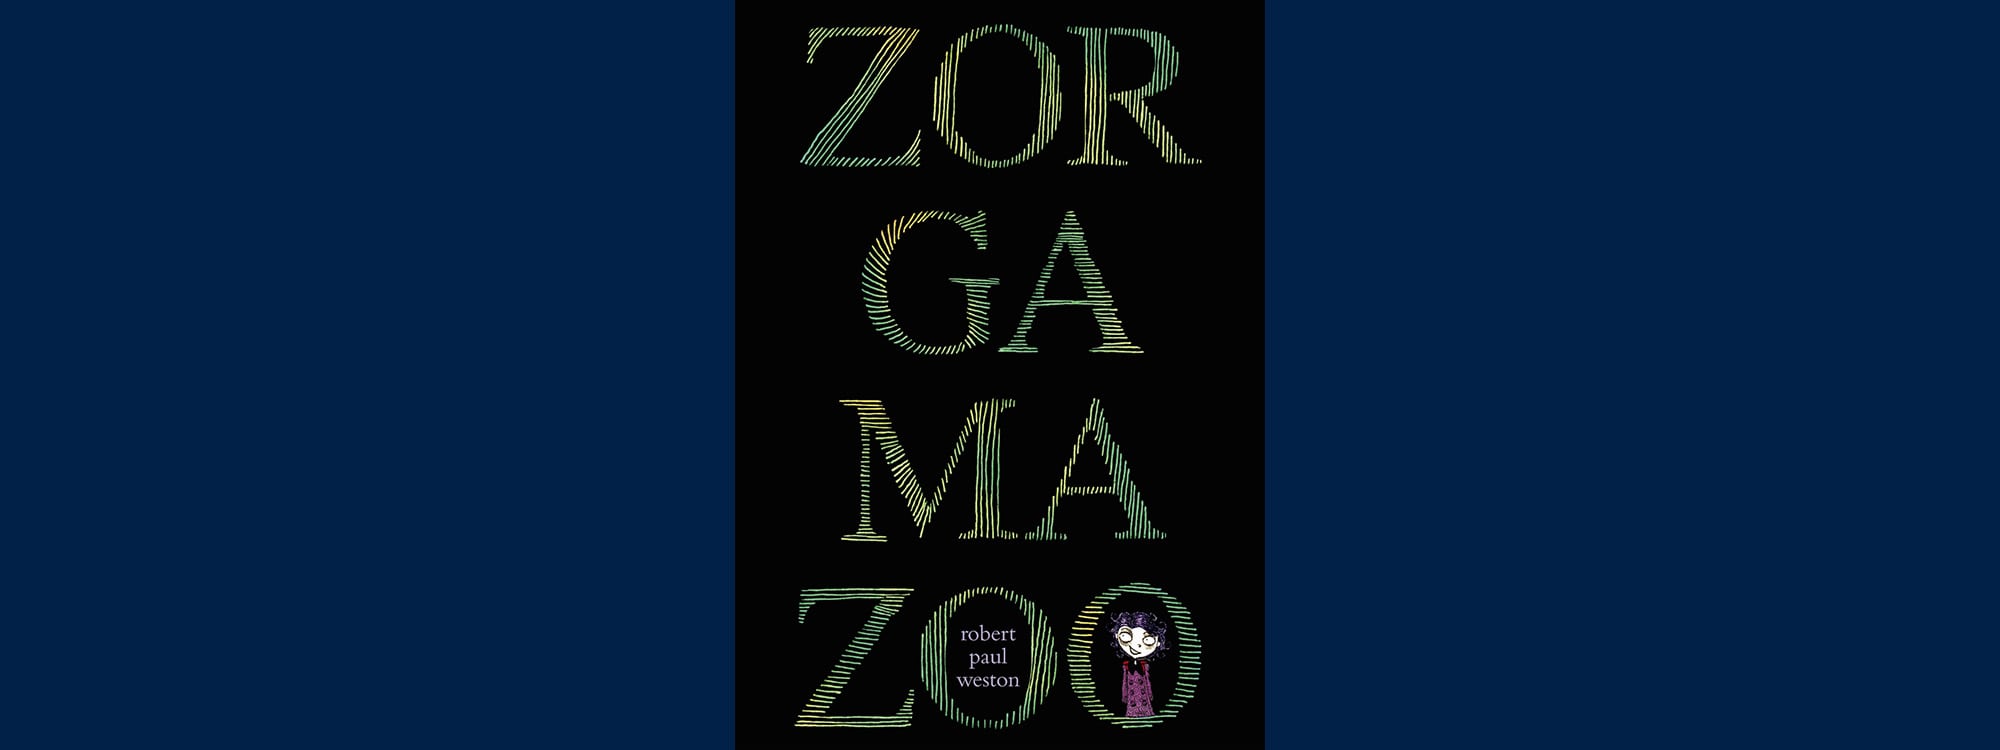 The book cover for Zorgamazoo